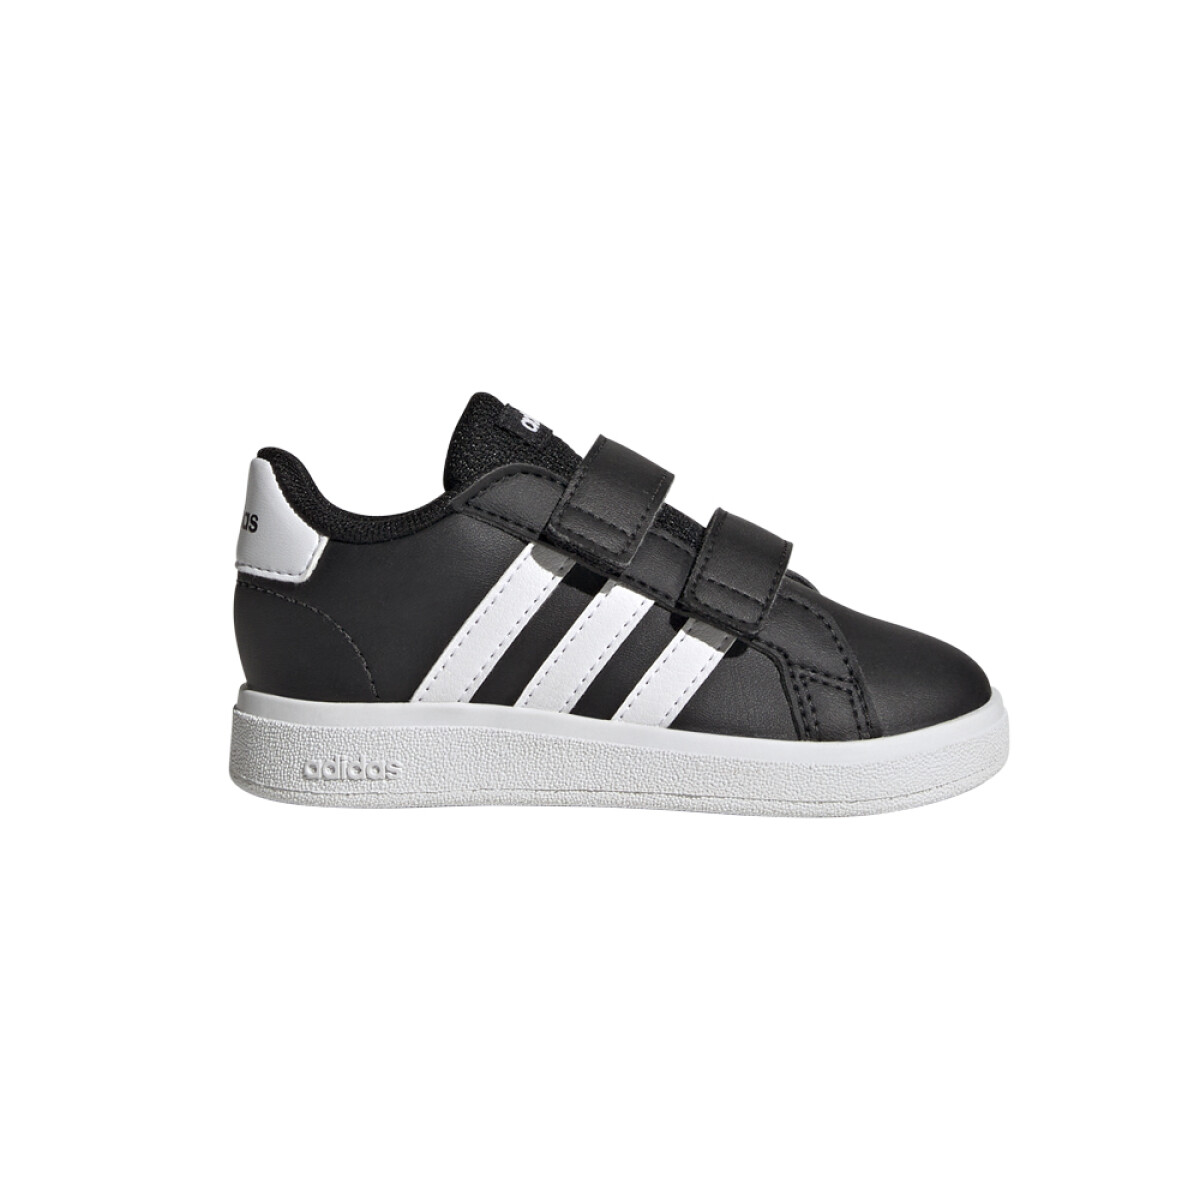 adidas GRAND COURT LIFESTYLE HOOK AND LOOP - Black/White 